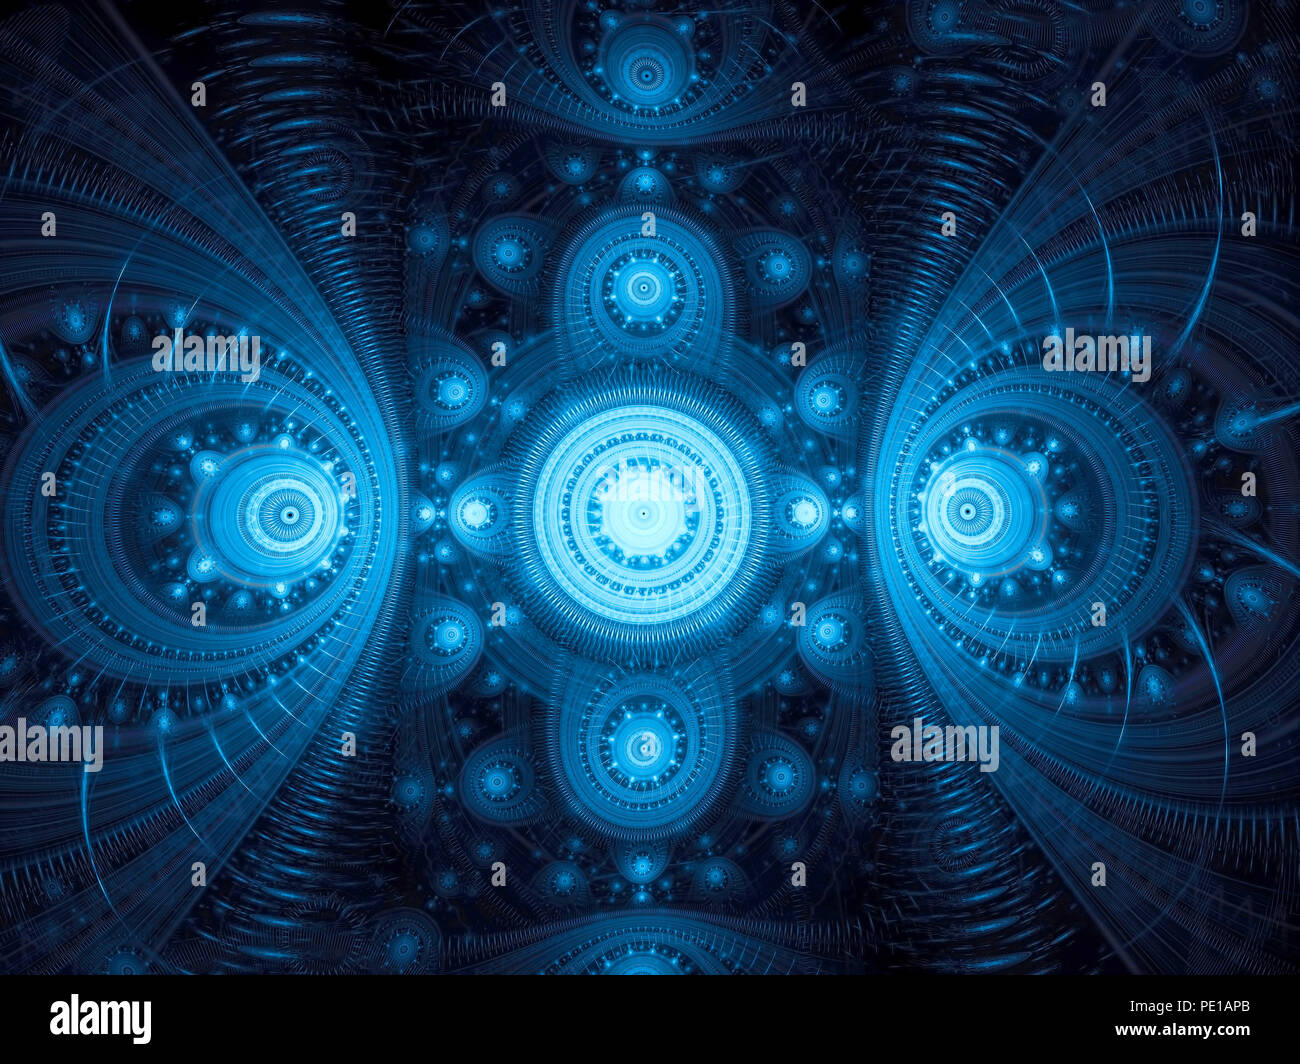 Abstract luxury pattern - digitally generated image fractal Stock Photo